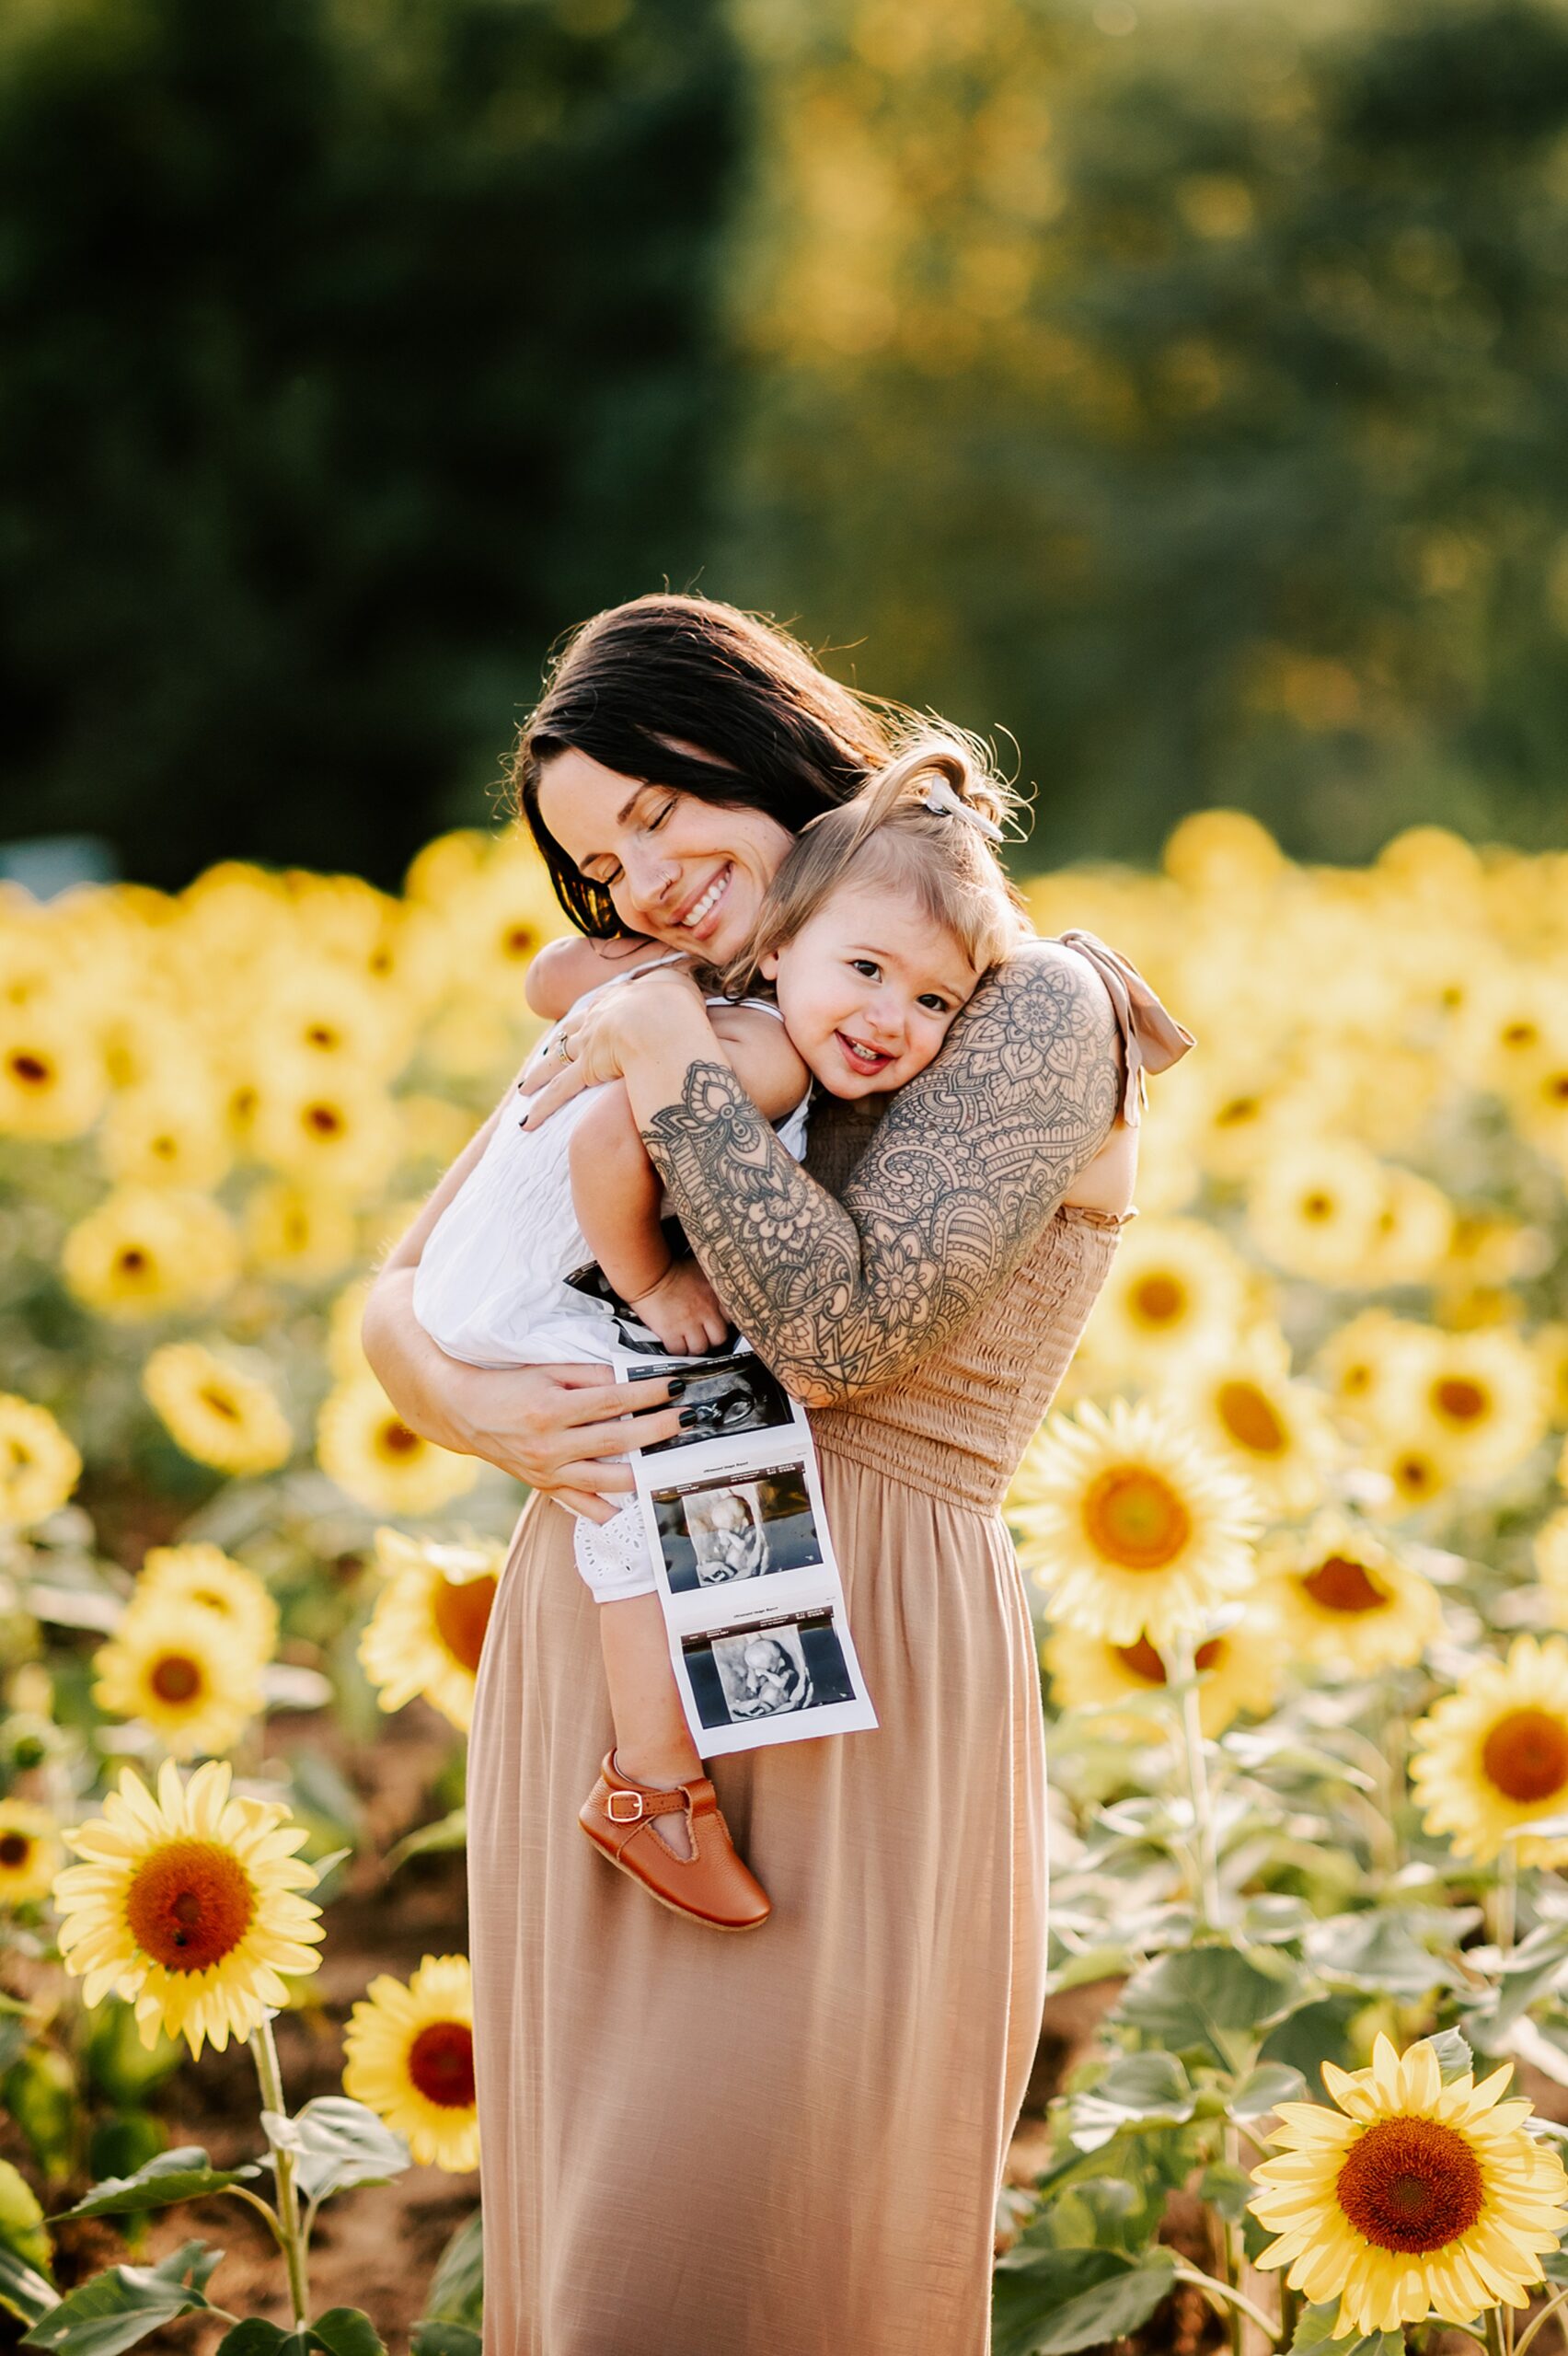 A mother hugs and cradles her toddler daughter while standing in a sunflower field in a brown maternity dress